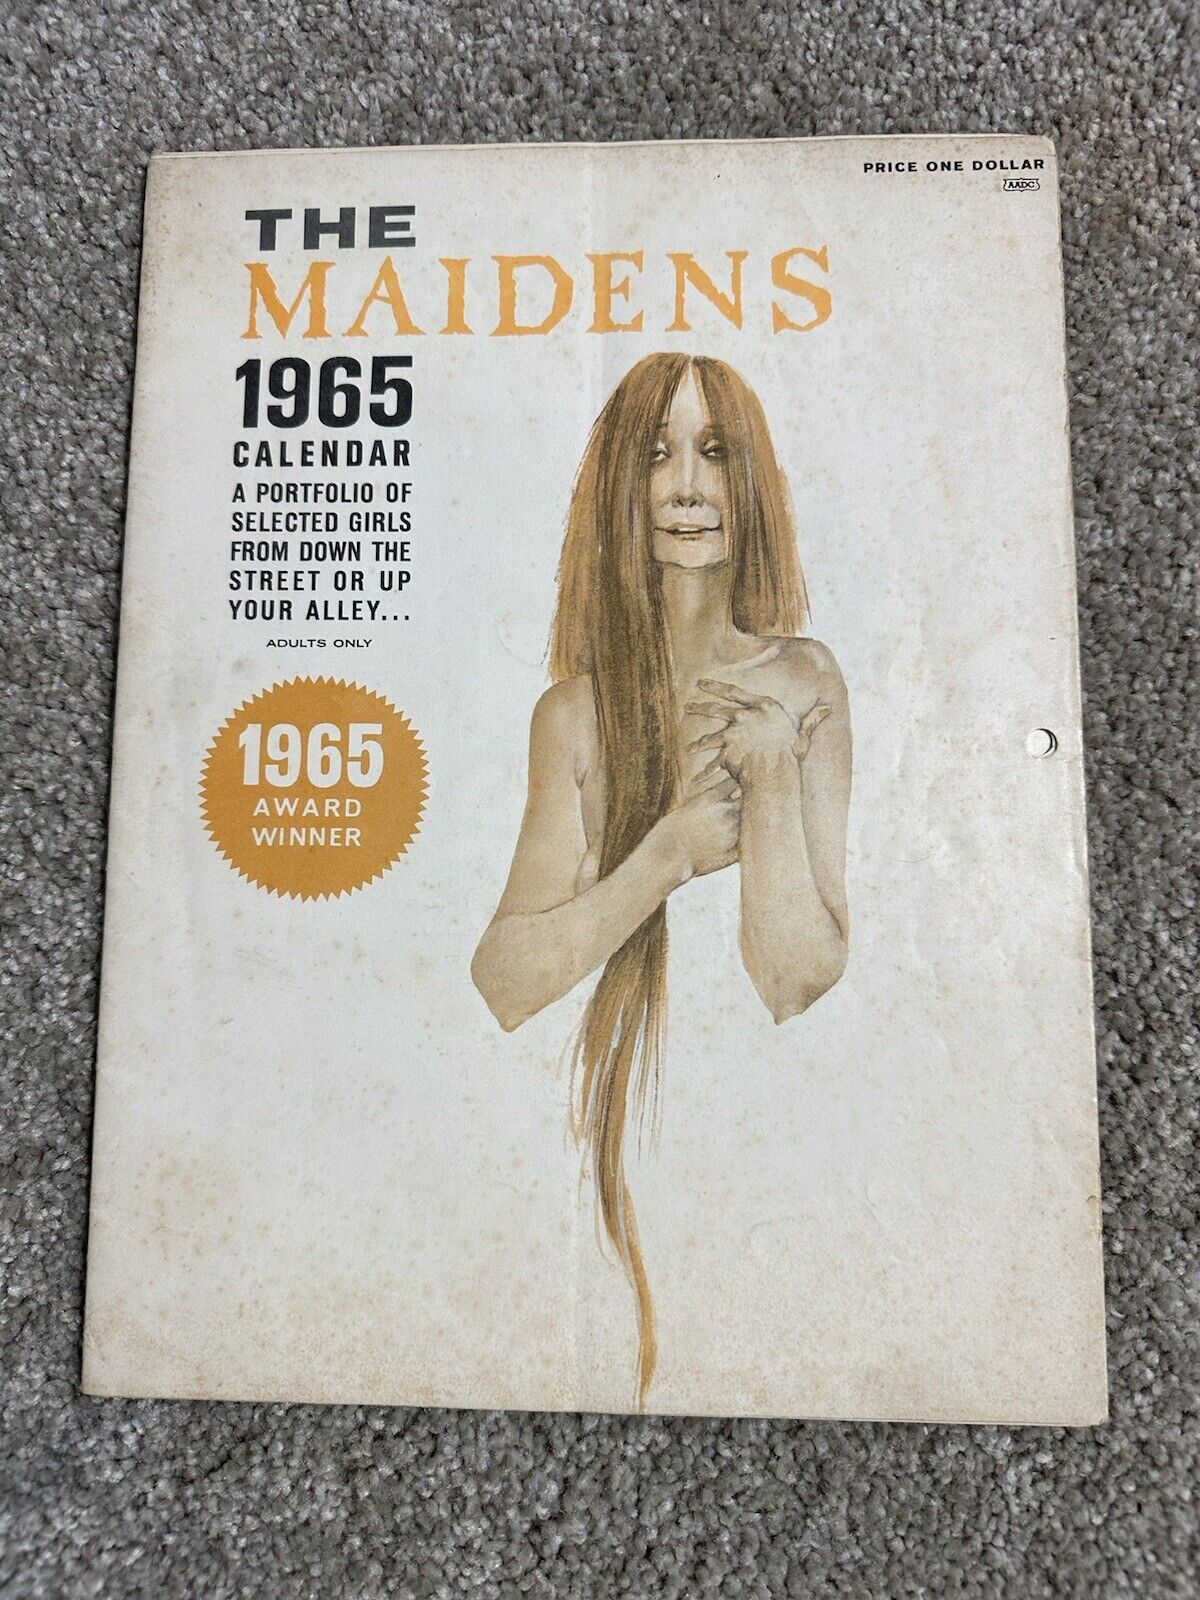 The Maidens 1965 Calendar Humorous Pinup Art Select Girls From Down Street Nudes